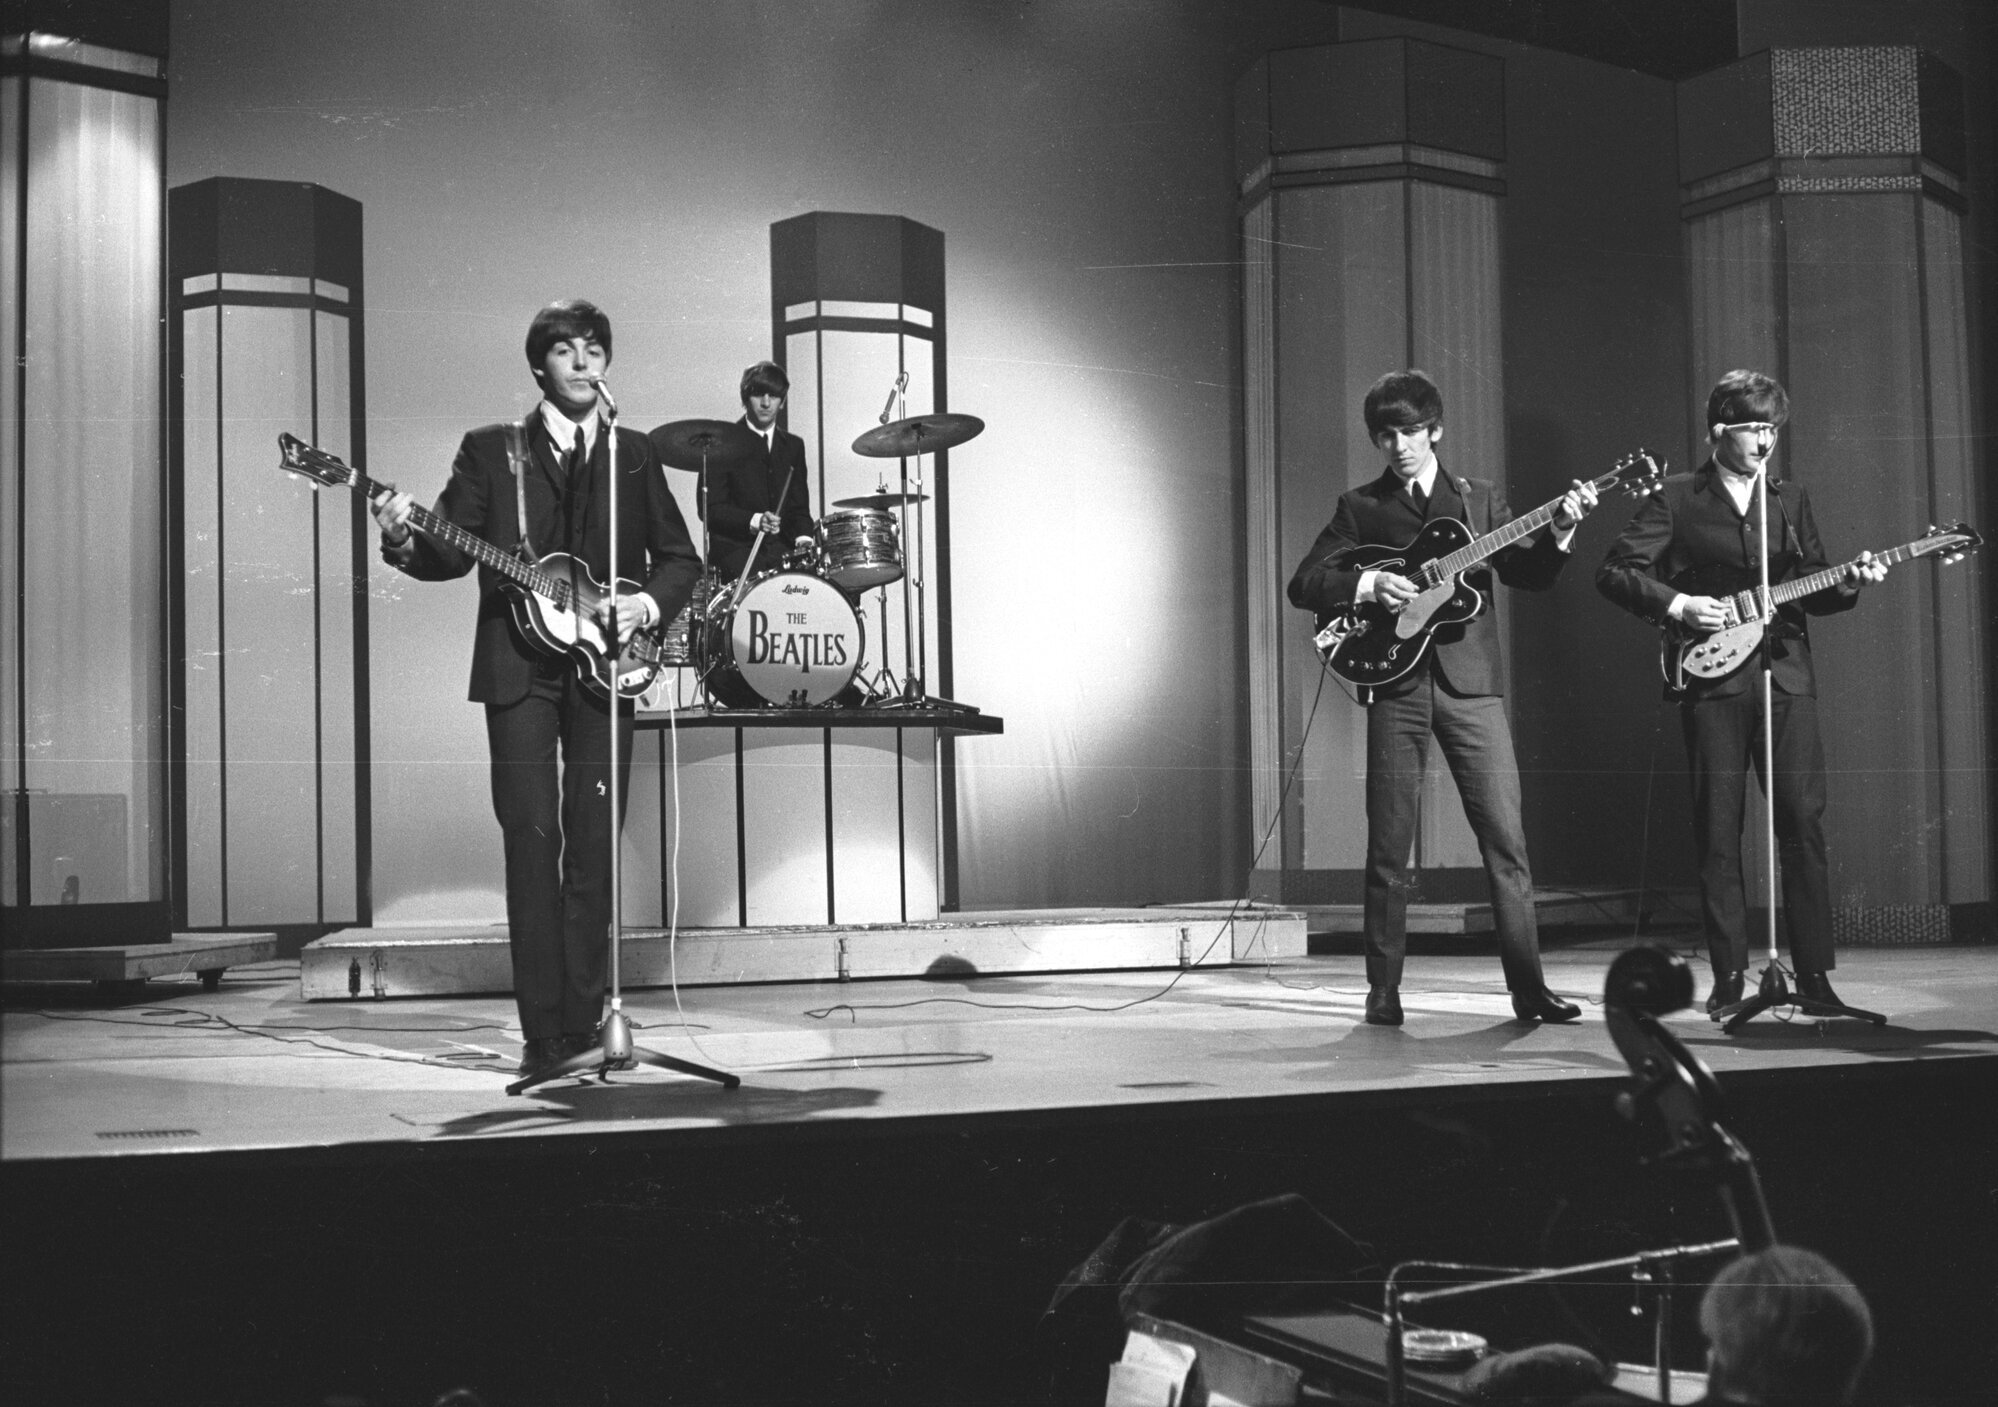 The Beatles, from left to right: Paul McCartney, Ringo Starr, George Harrison, and John Lennon in concert at the London Palladium.